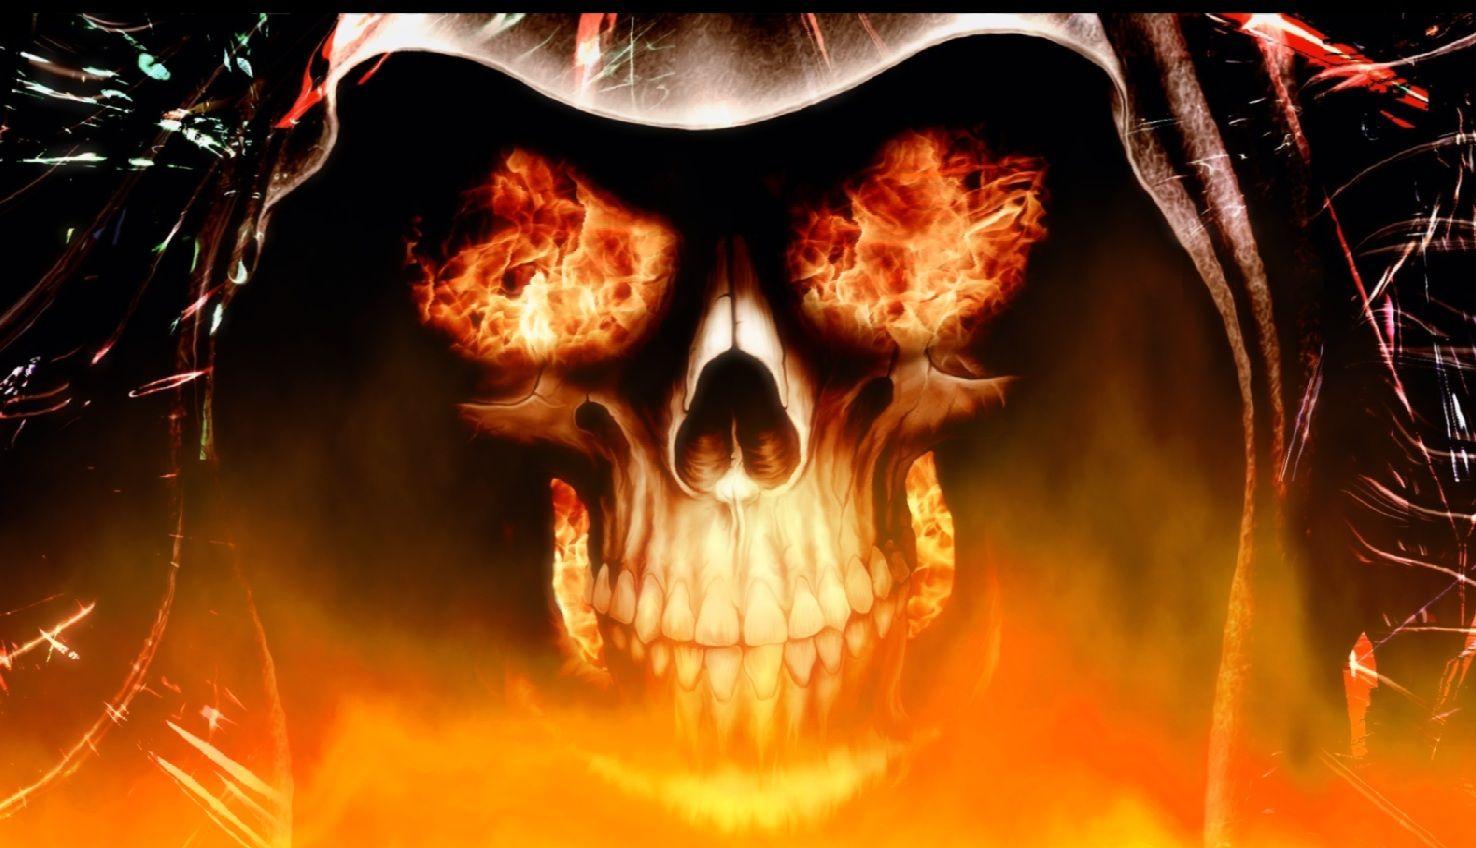 Download Fire Skull Animated Wallpaper. DesktopAnimated.com. Skull wallpaper, Skull fire, Fire art